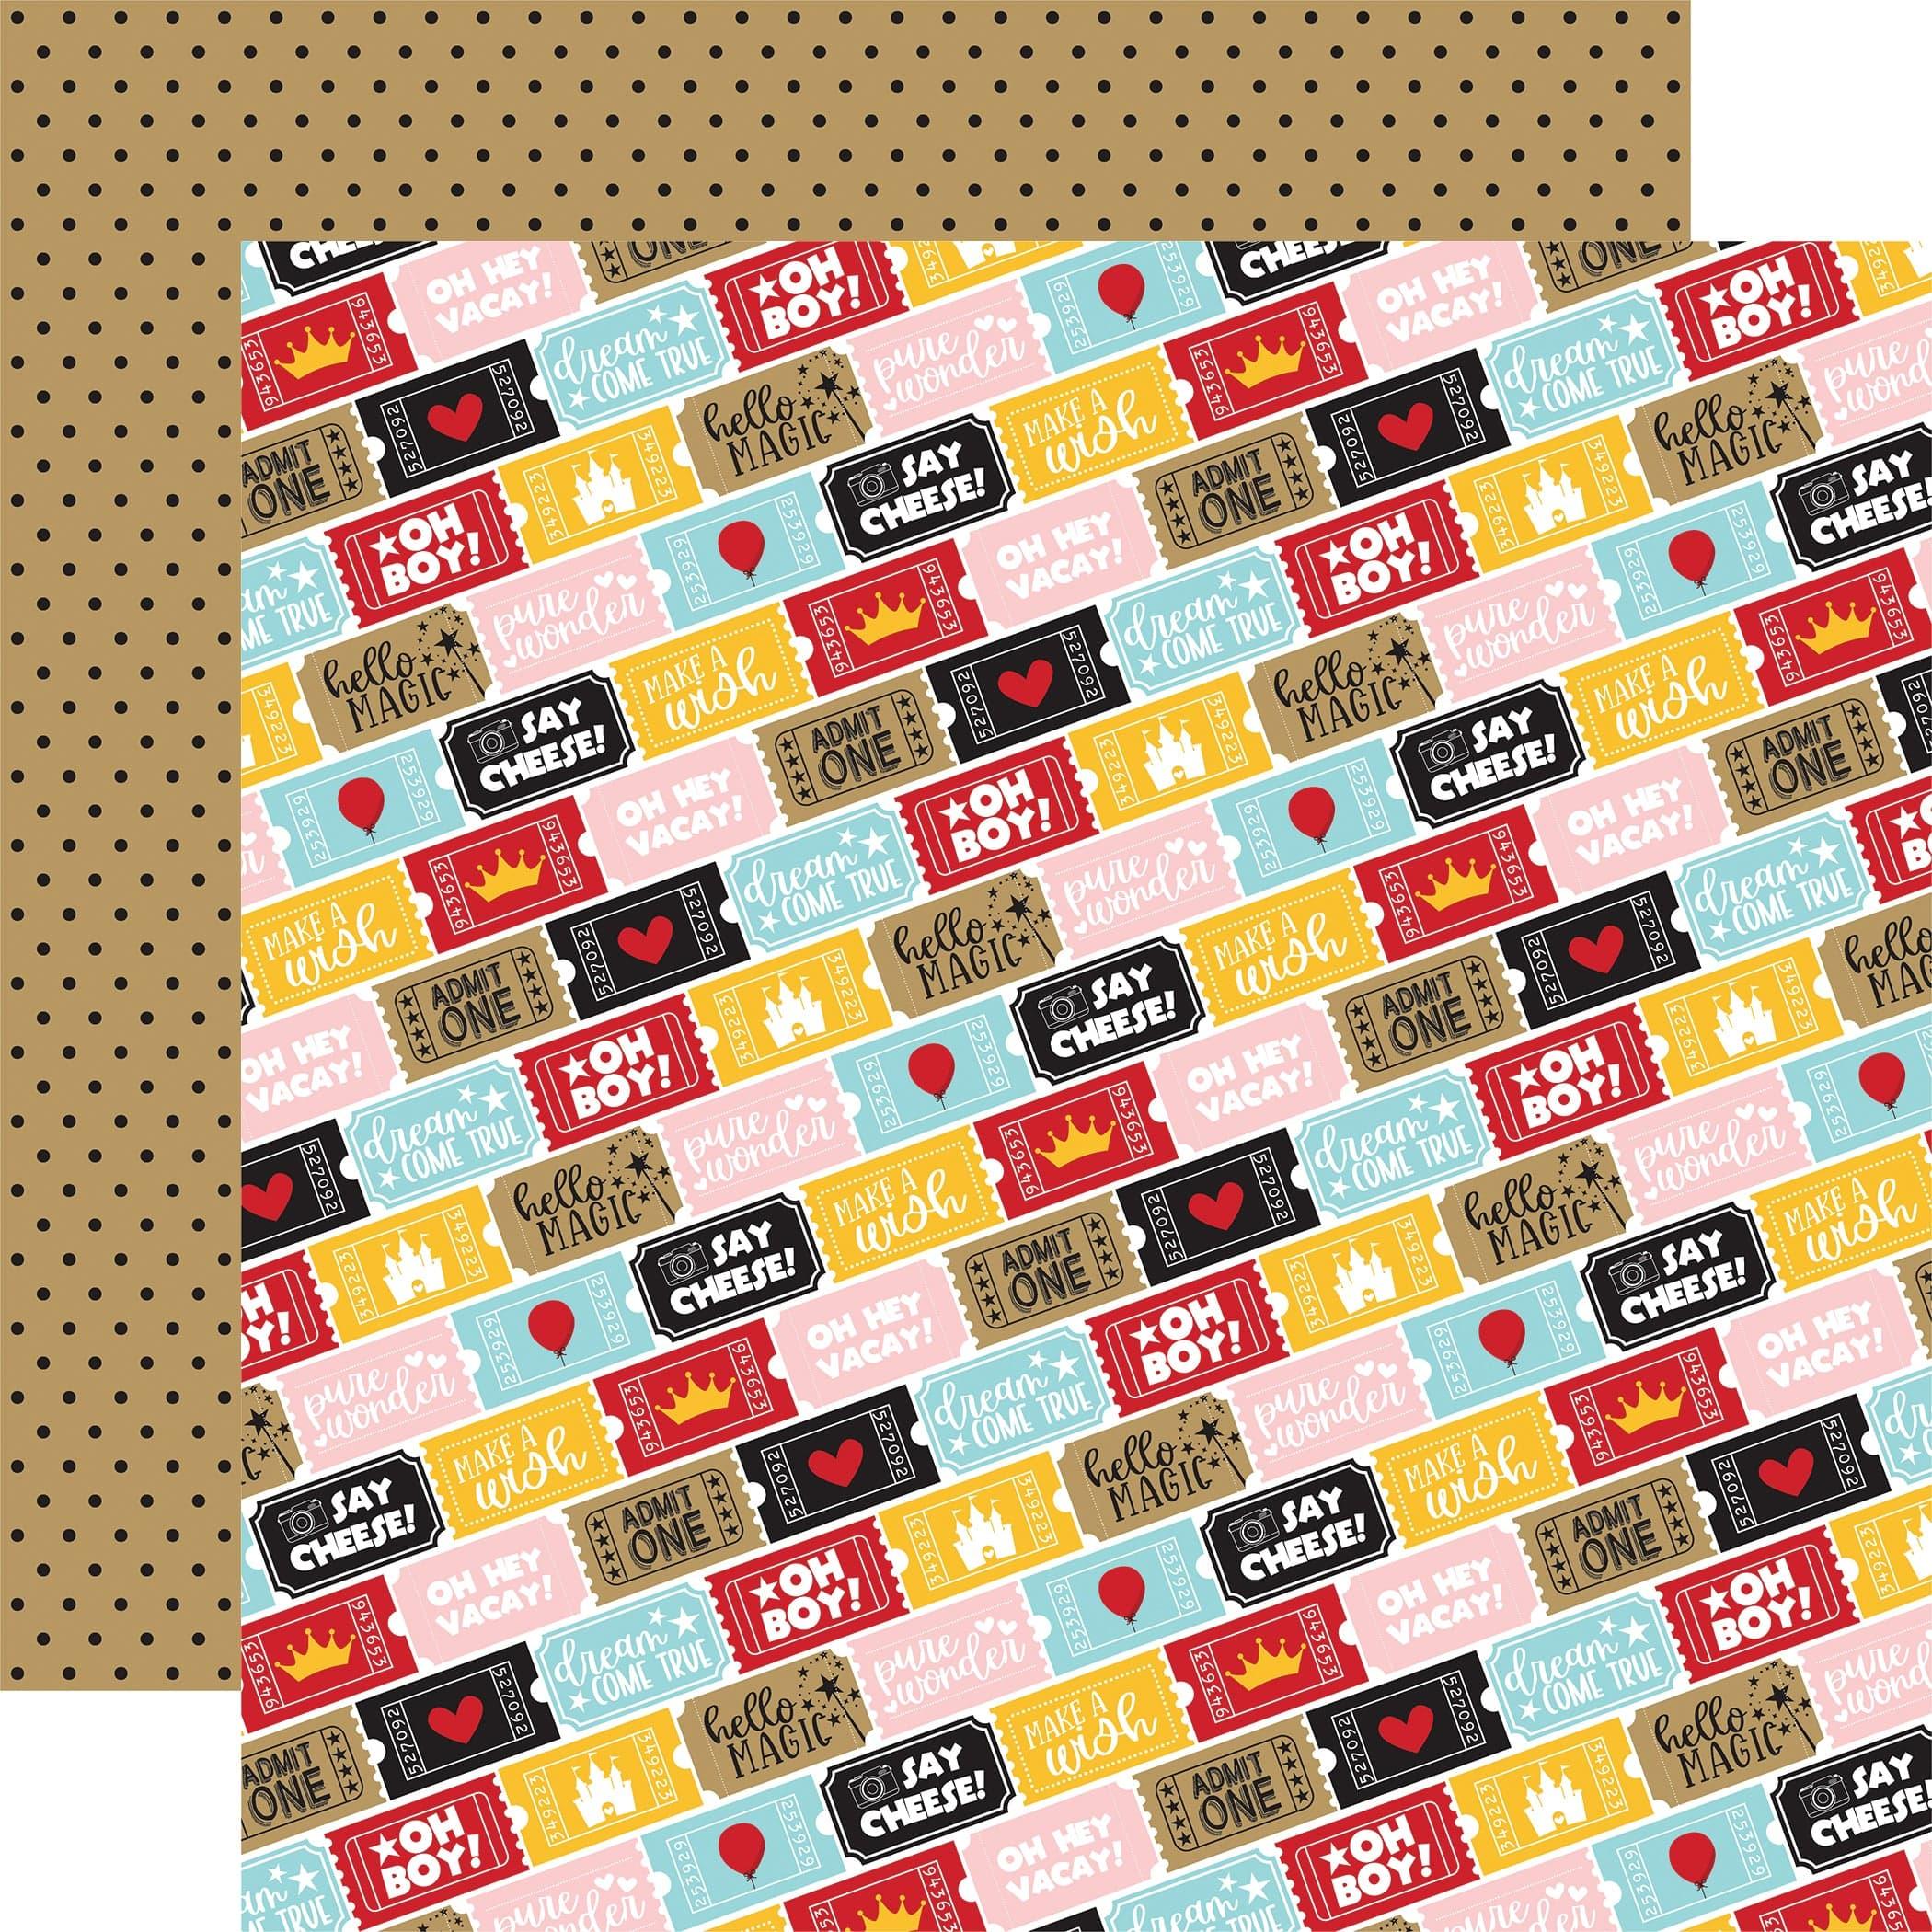 Wish Upon A Star 2 Collection Ticket To Fun 12 x 12 Double-Sided Scrapbook Paper by Echo Park Paper